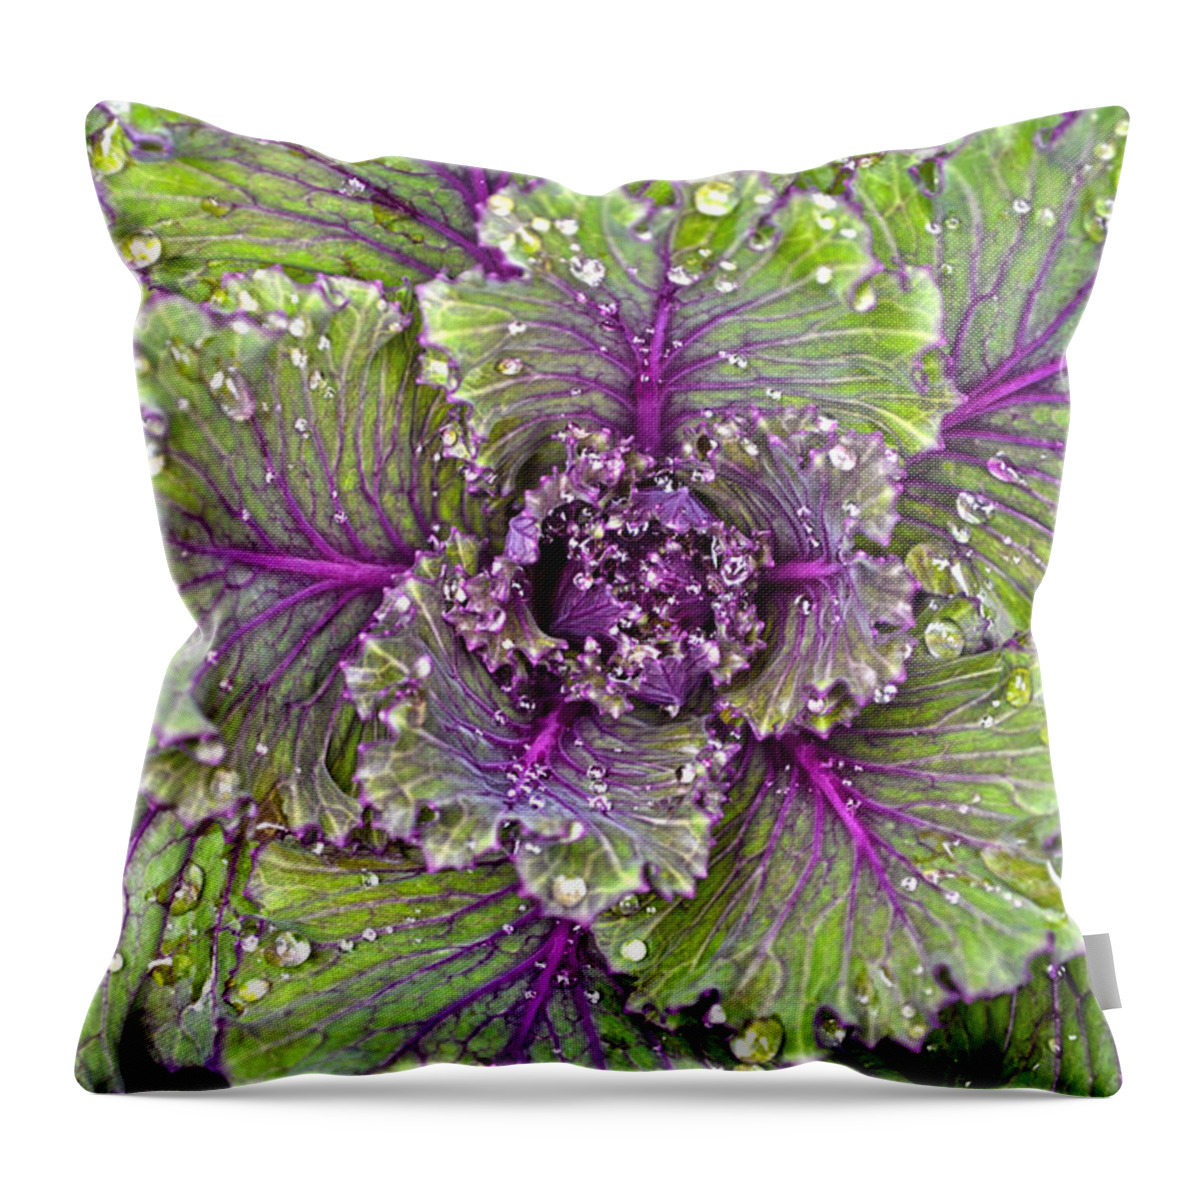 Kale Throw Pillow featuring the photograph Kale Plant In The Rain by Sandi OReilly